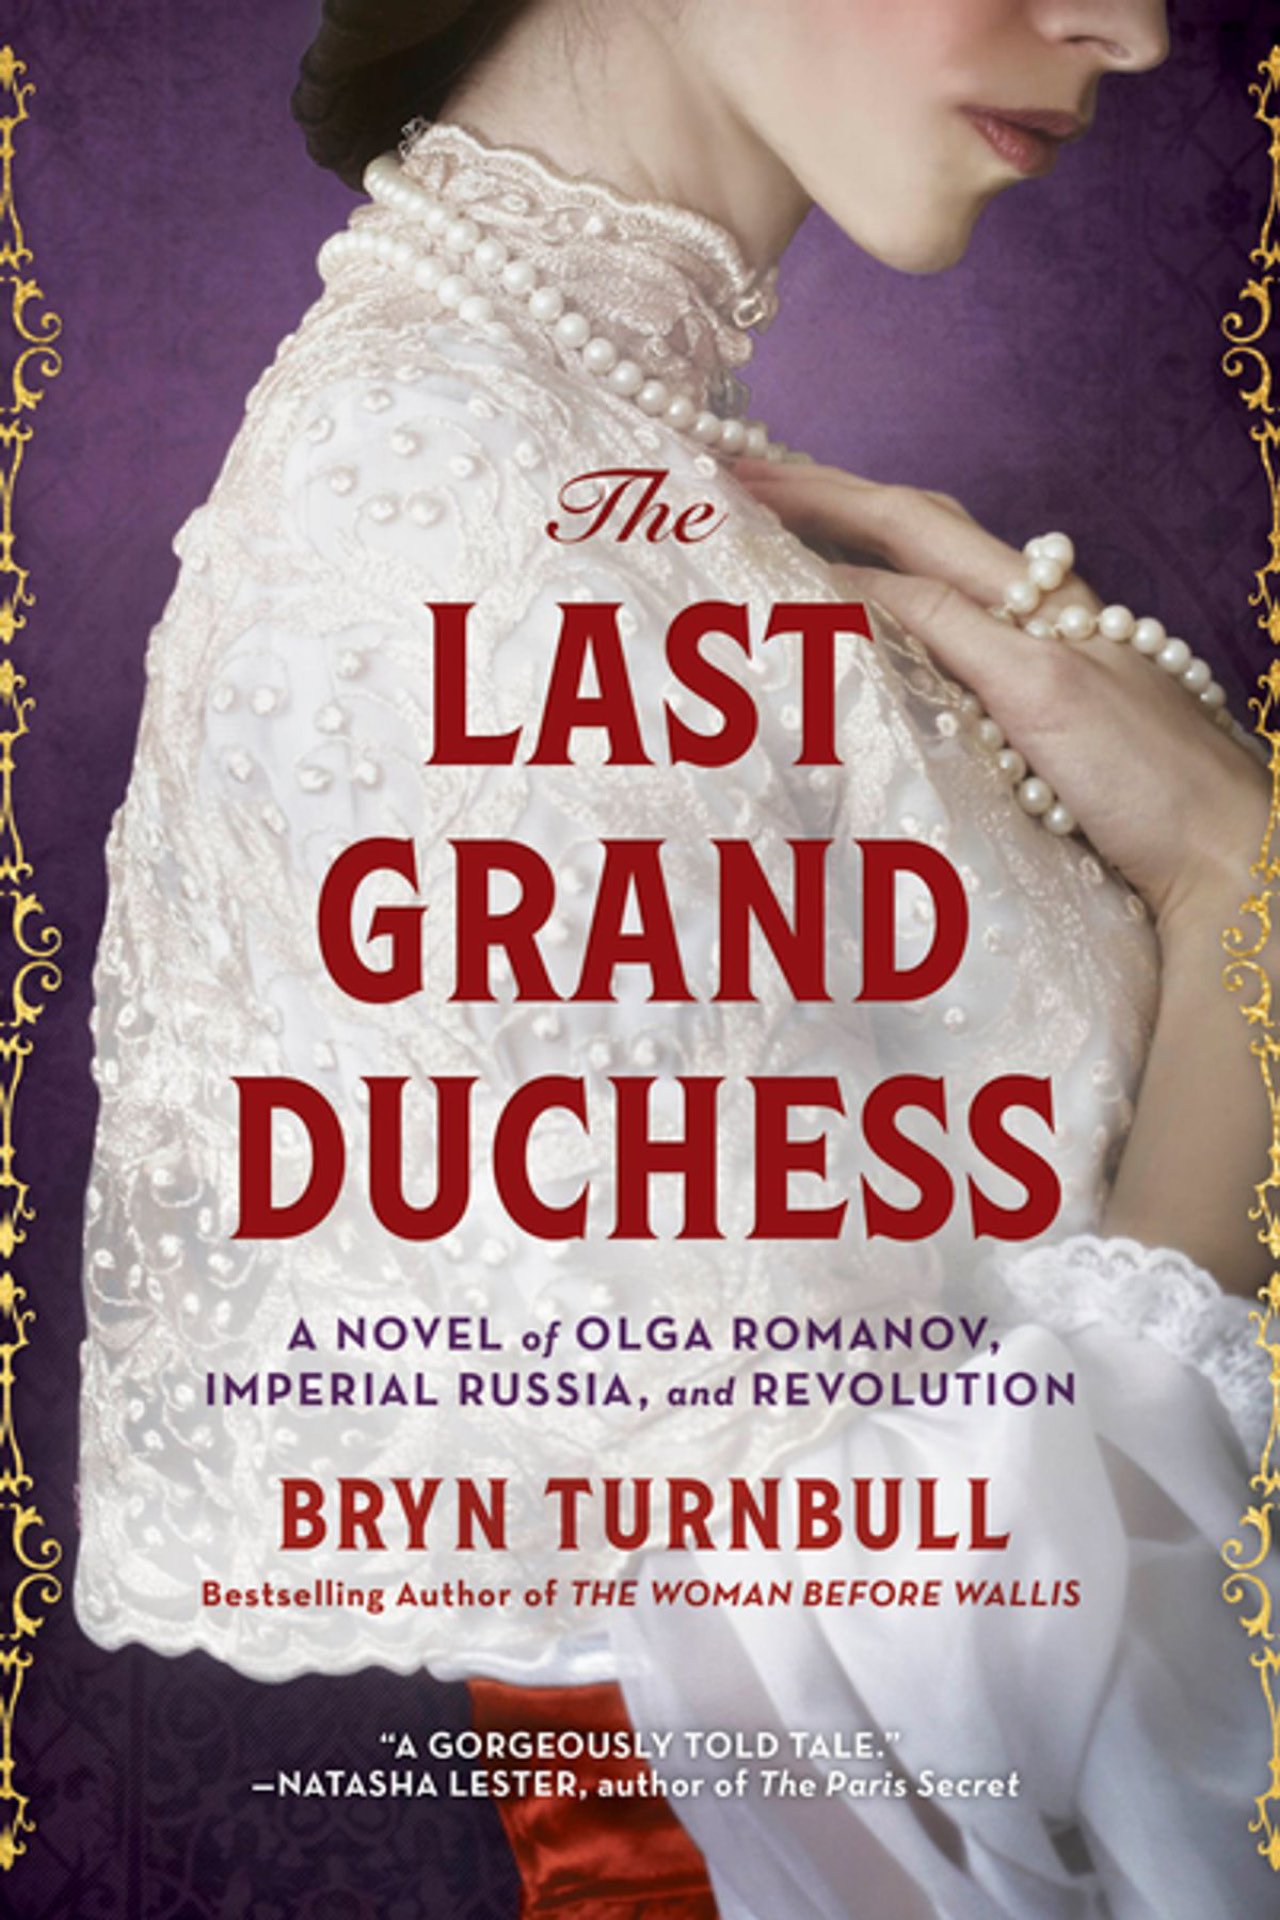 The cover of The Last Grand Duchess by Bryn Turnbull